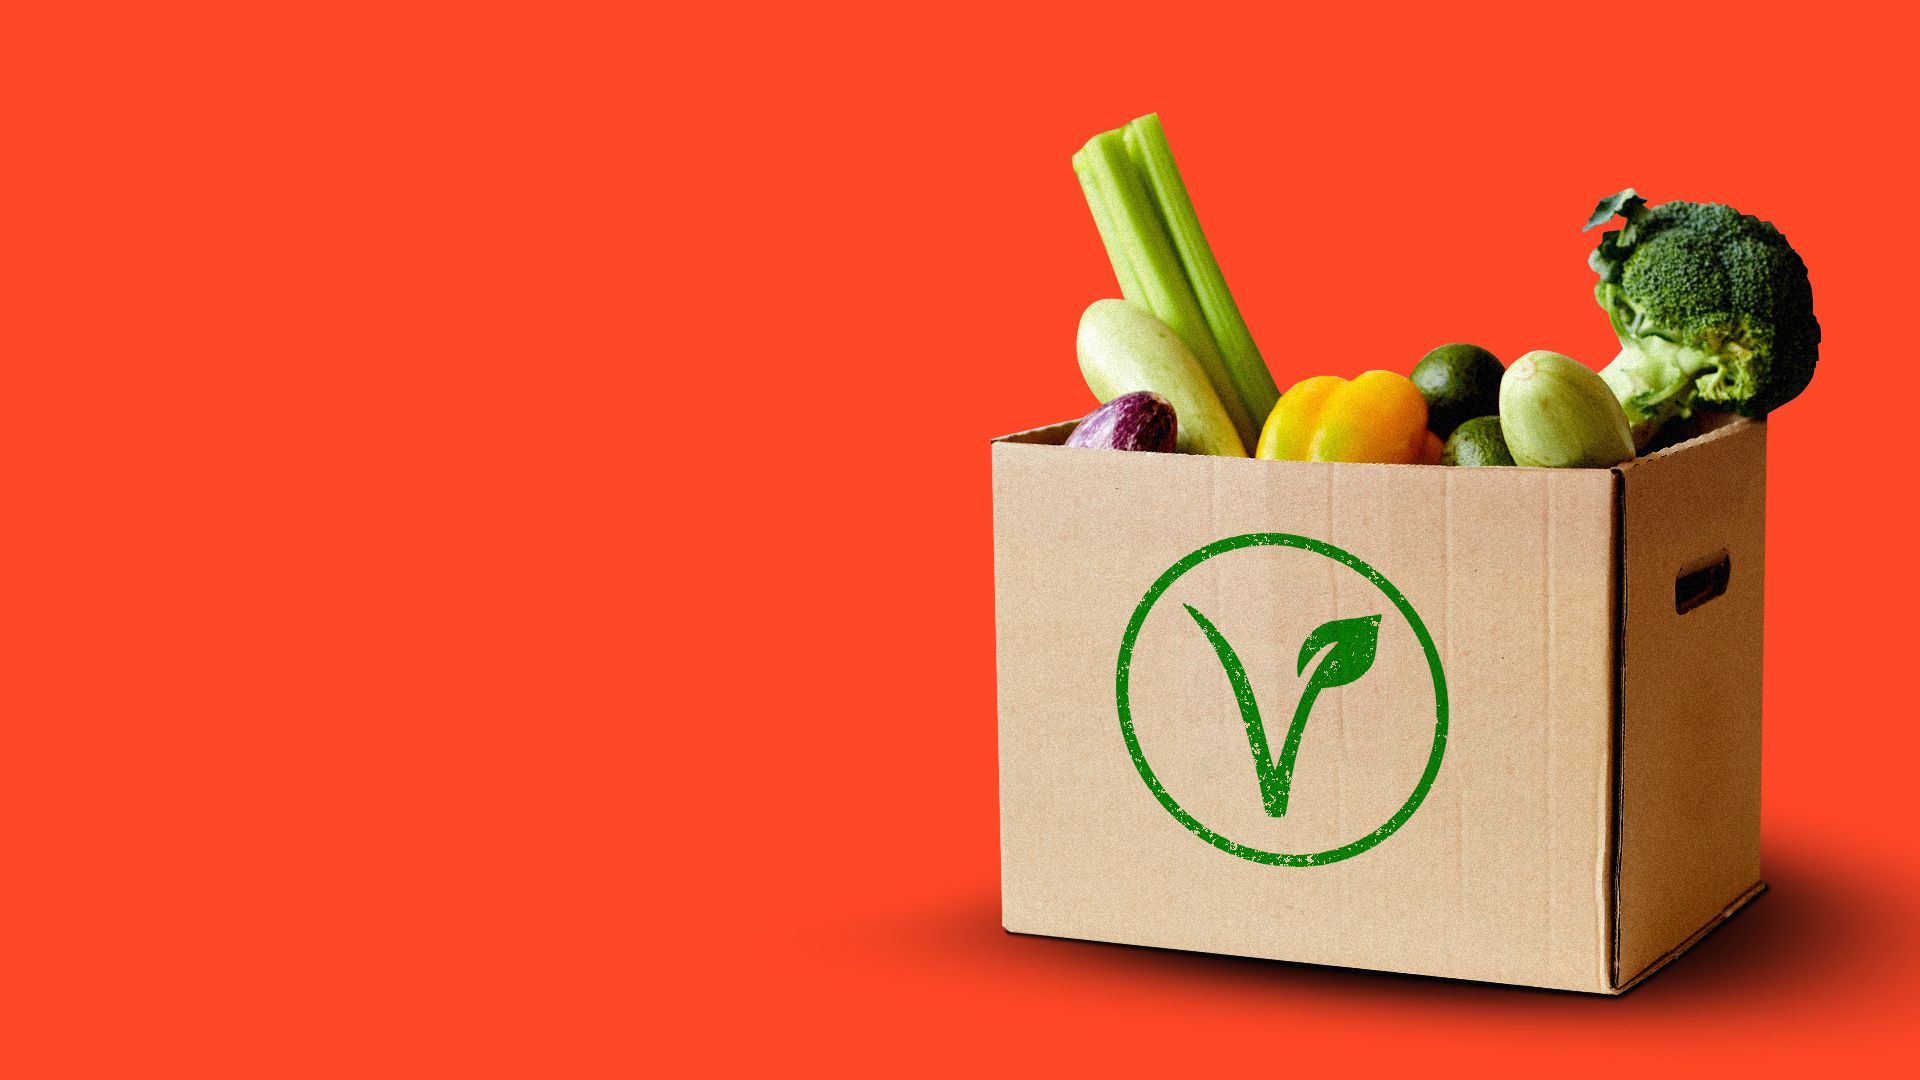 Illustration of a box of food donations with the vegan symbol on the front. 